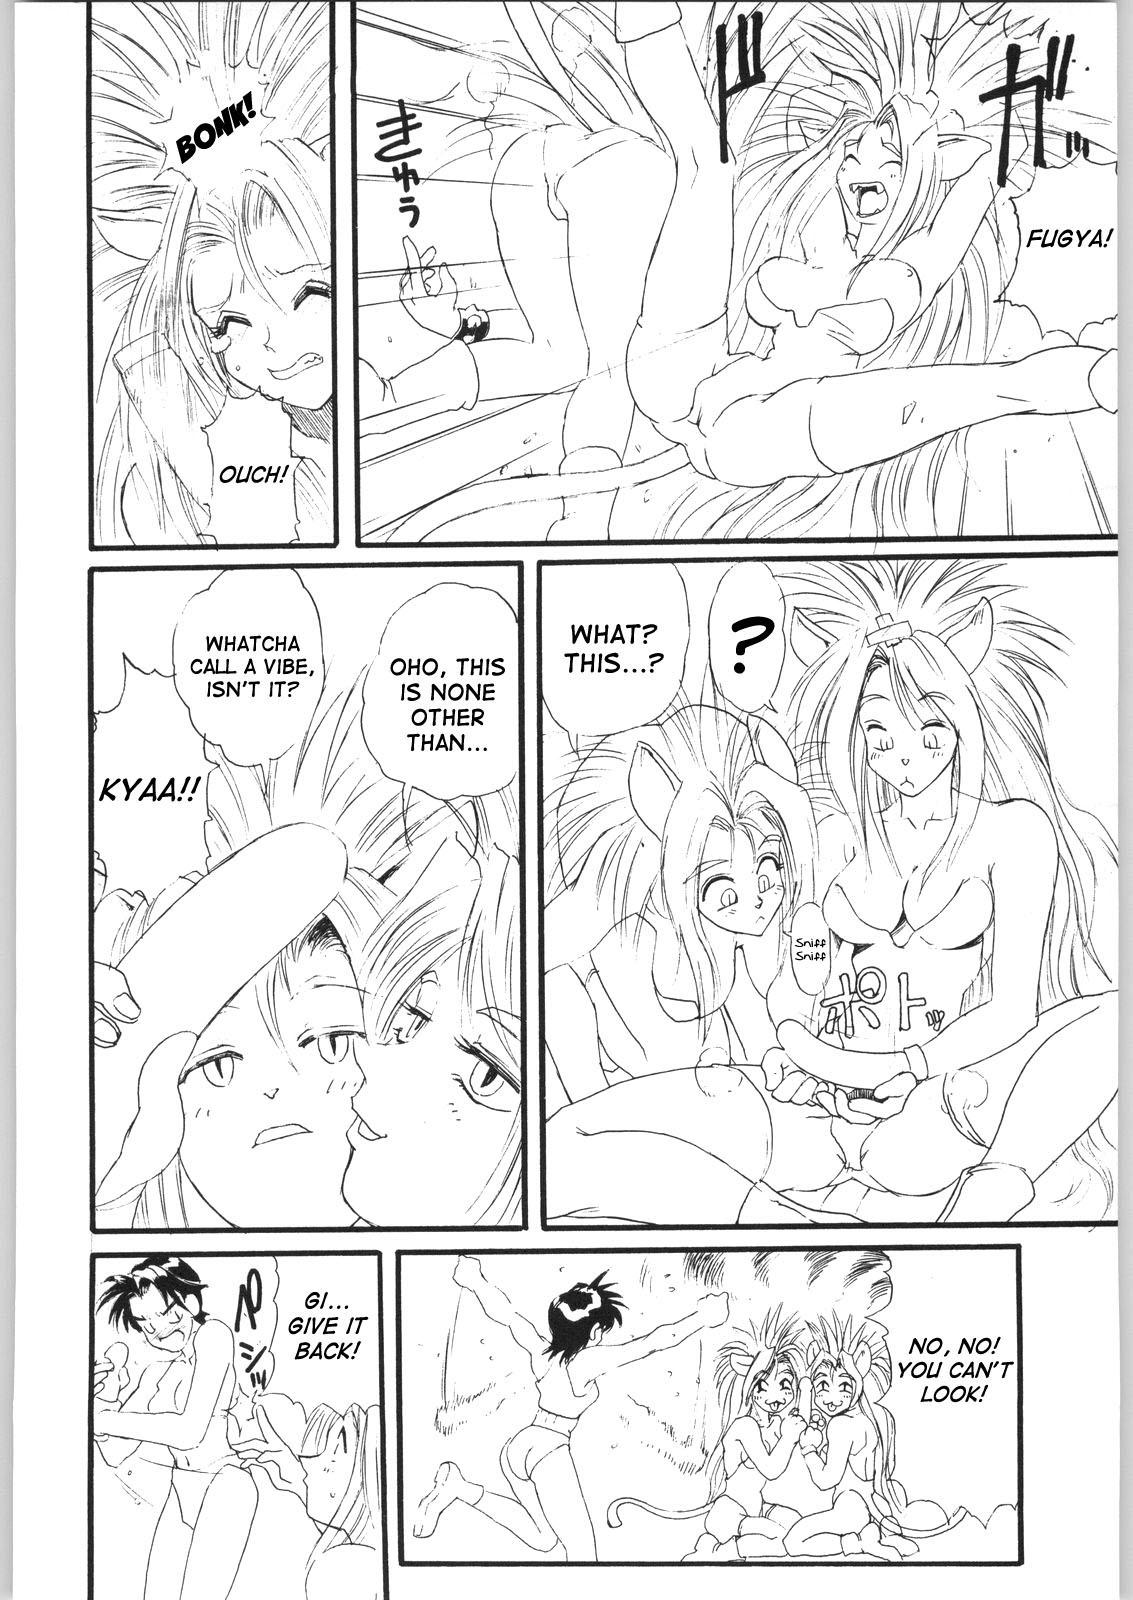 Teenager Close Up Gendai: Remedial Leona - Dominion tank police Hiddencam - Page 5